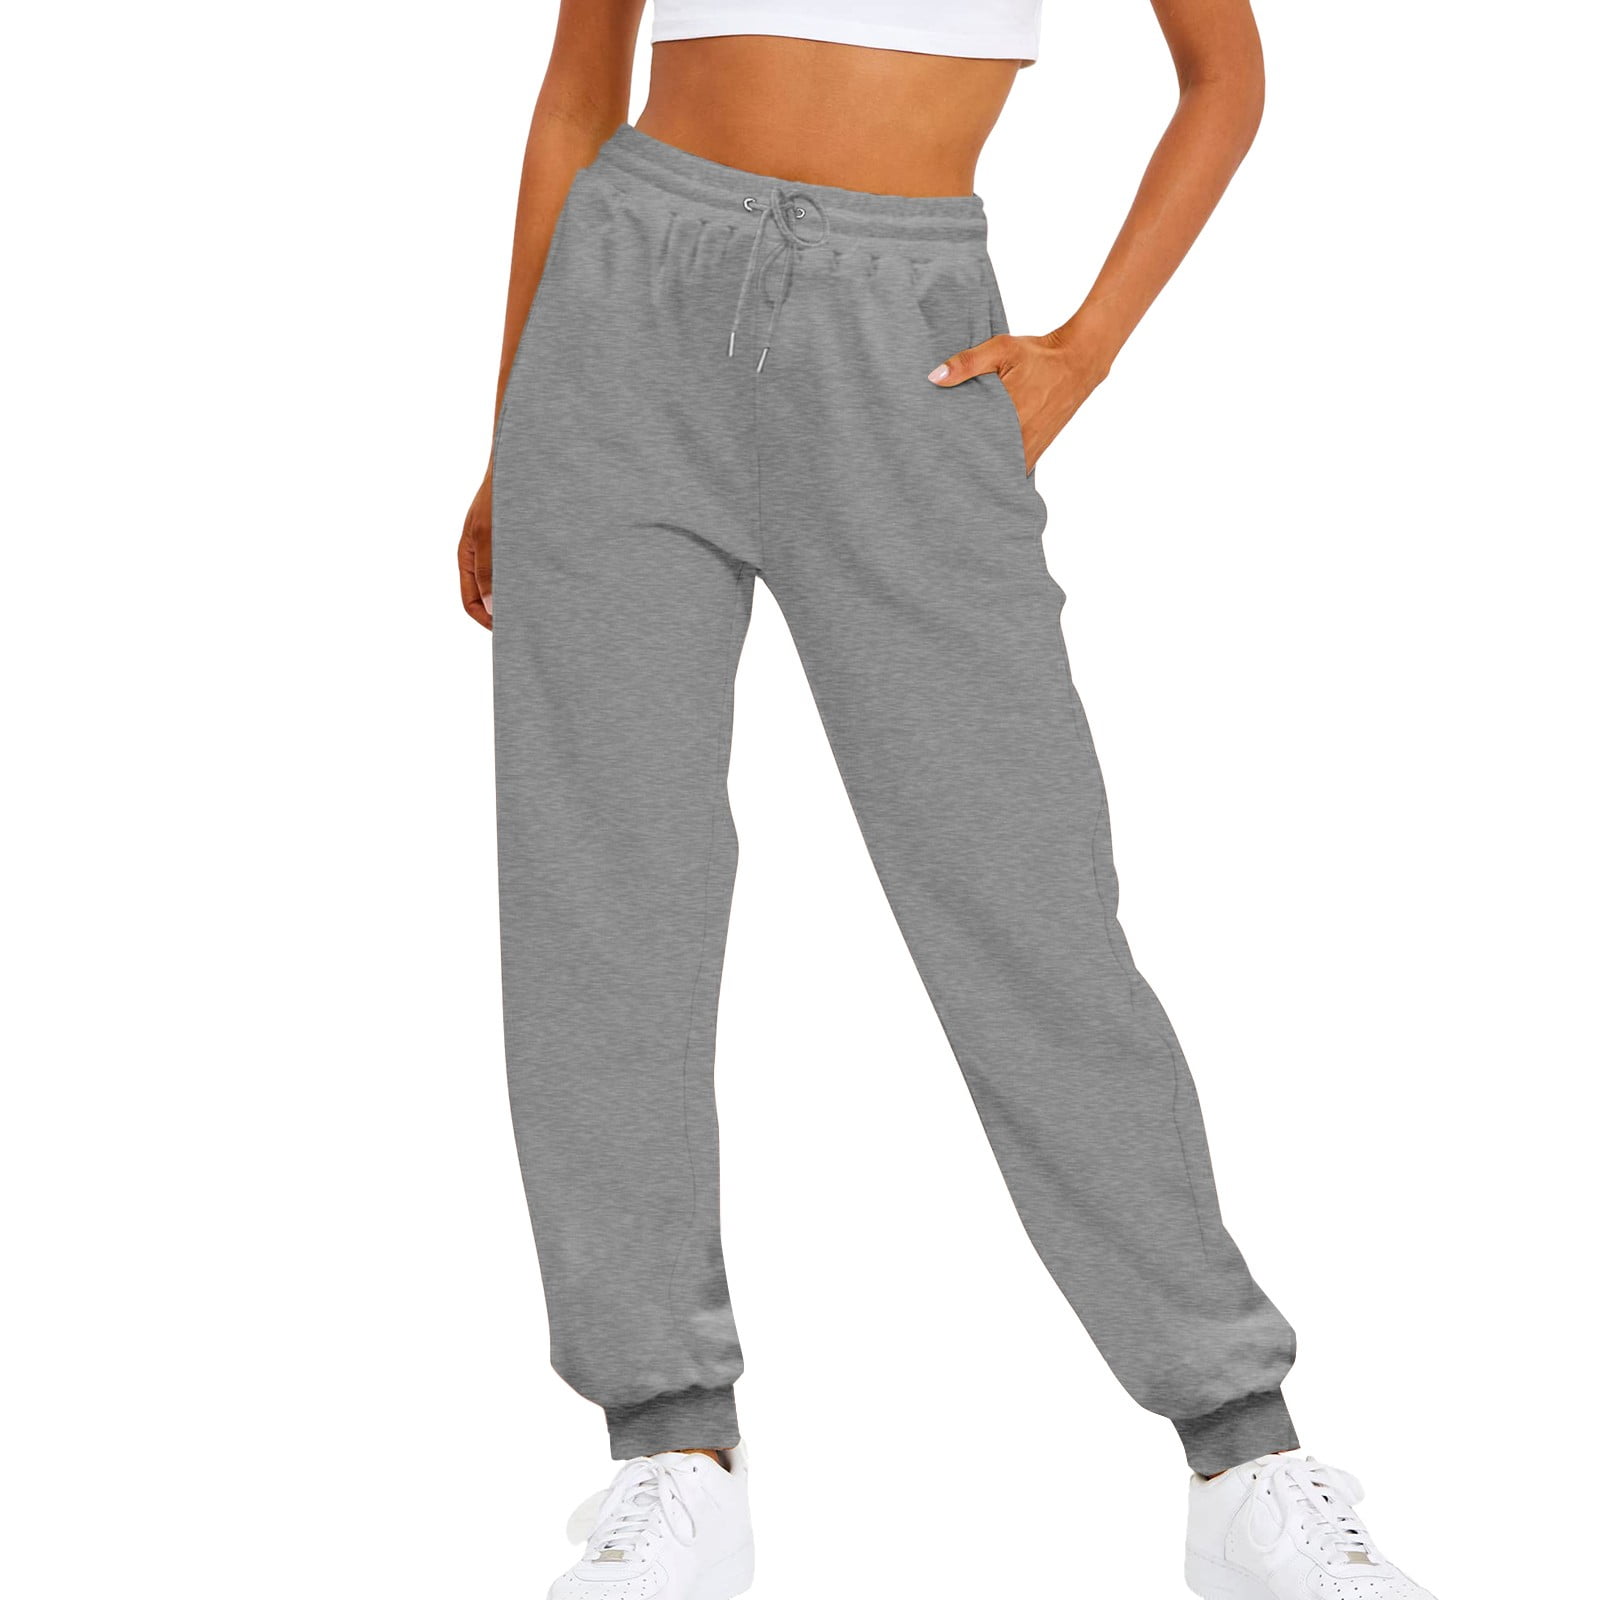 Women's Loose Cargo Sweatpants Pockets Sporty Gym Athletic Fit